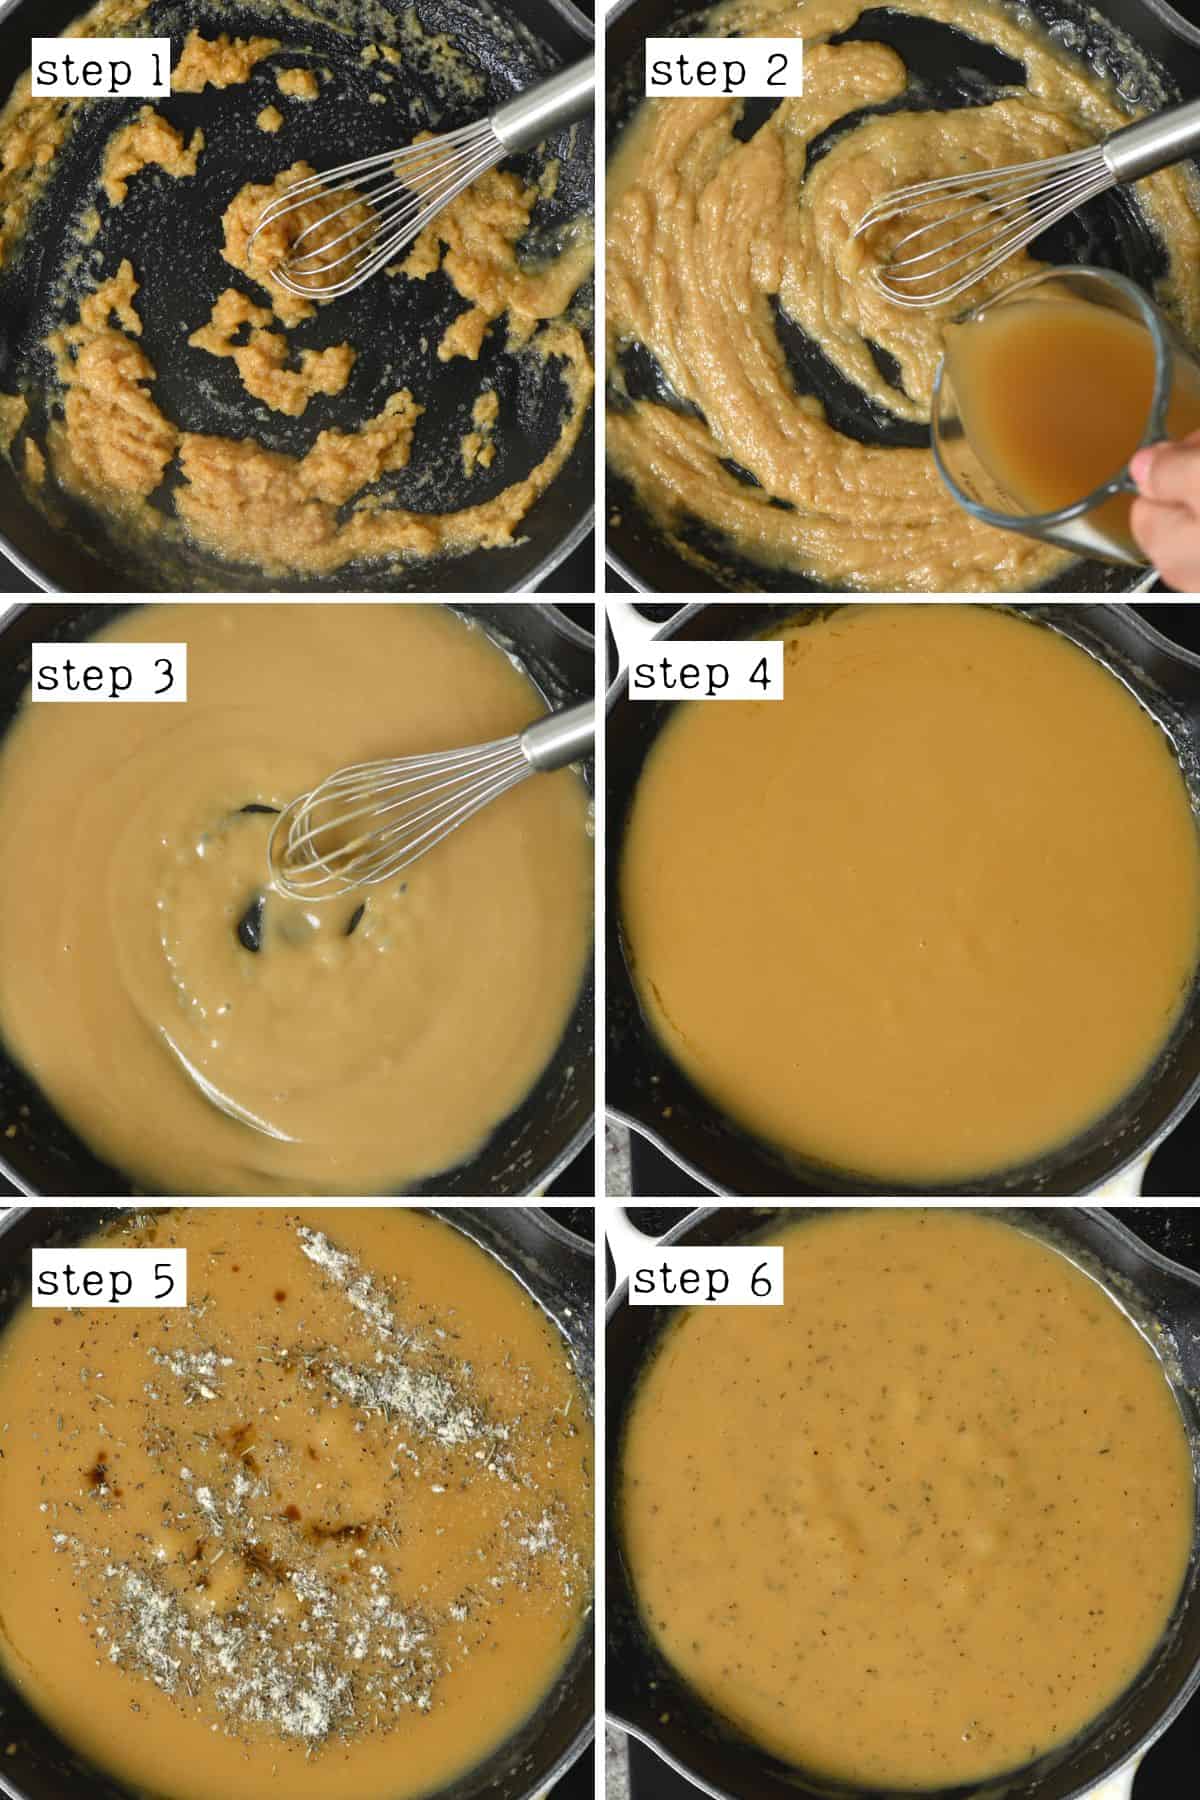 Steps for making brown gravy from scratch